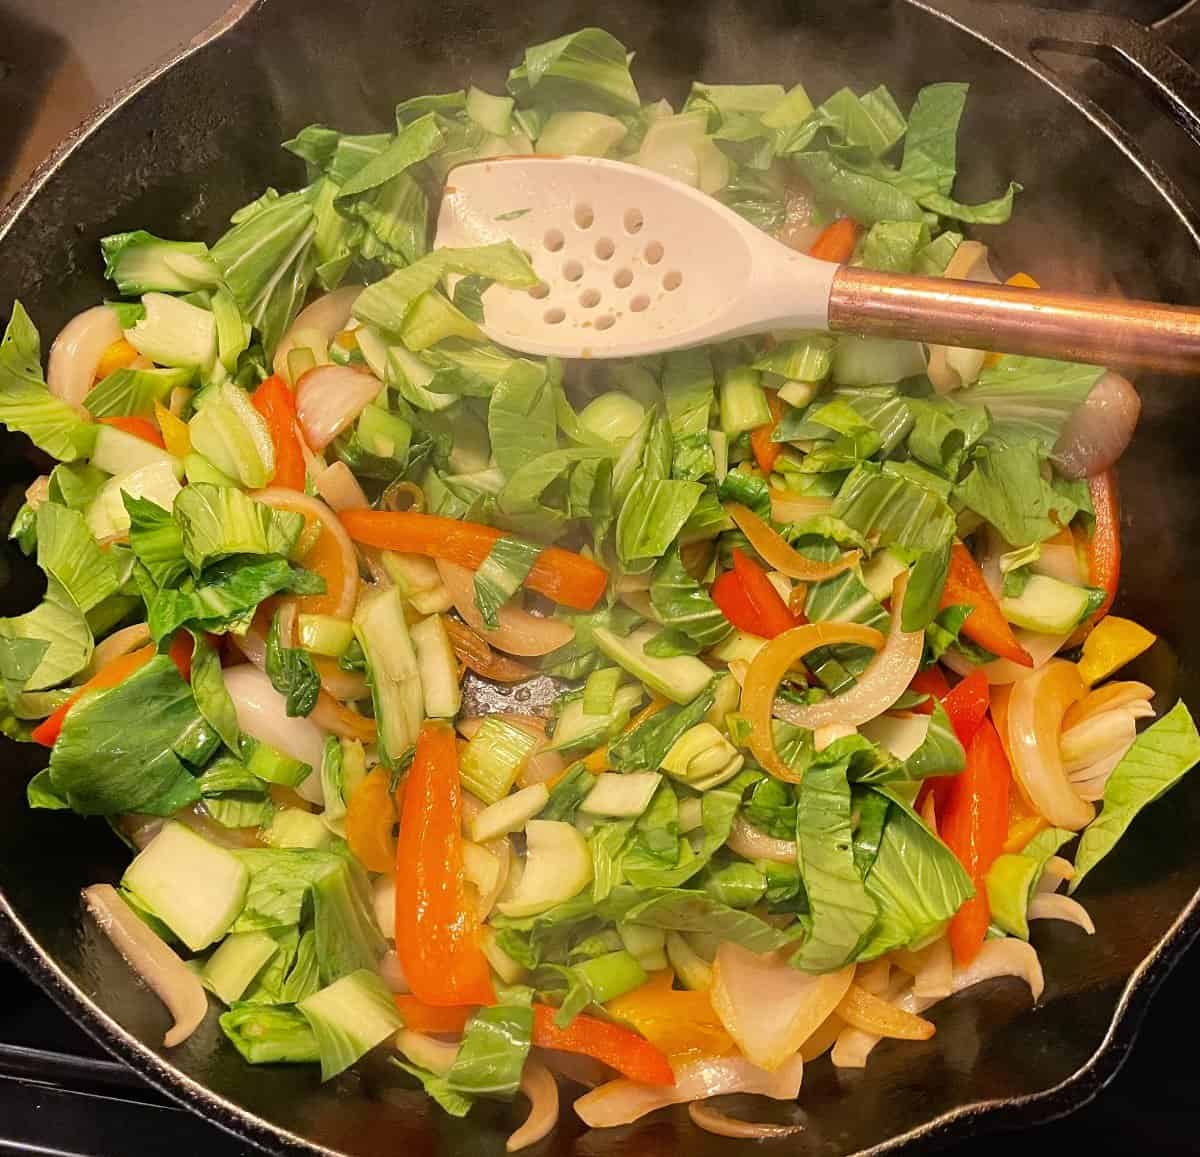 Chopped bok choy, sliced red peppers, orange peppers, and white onions in a black frying pan.